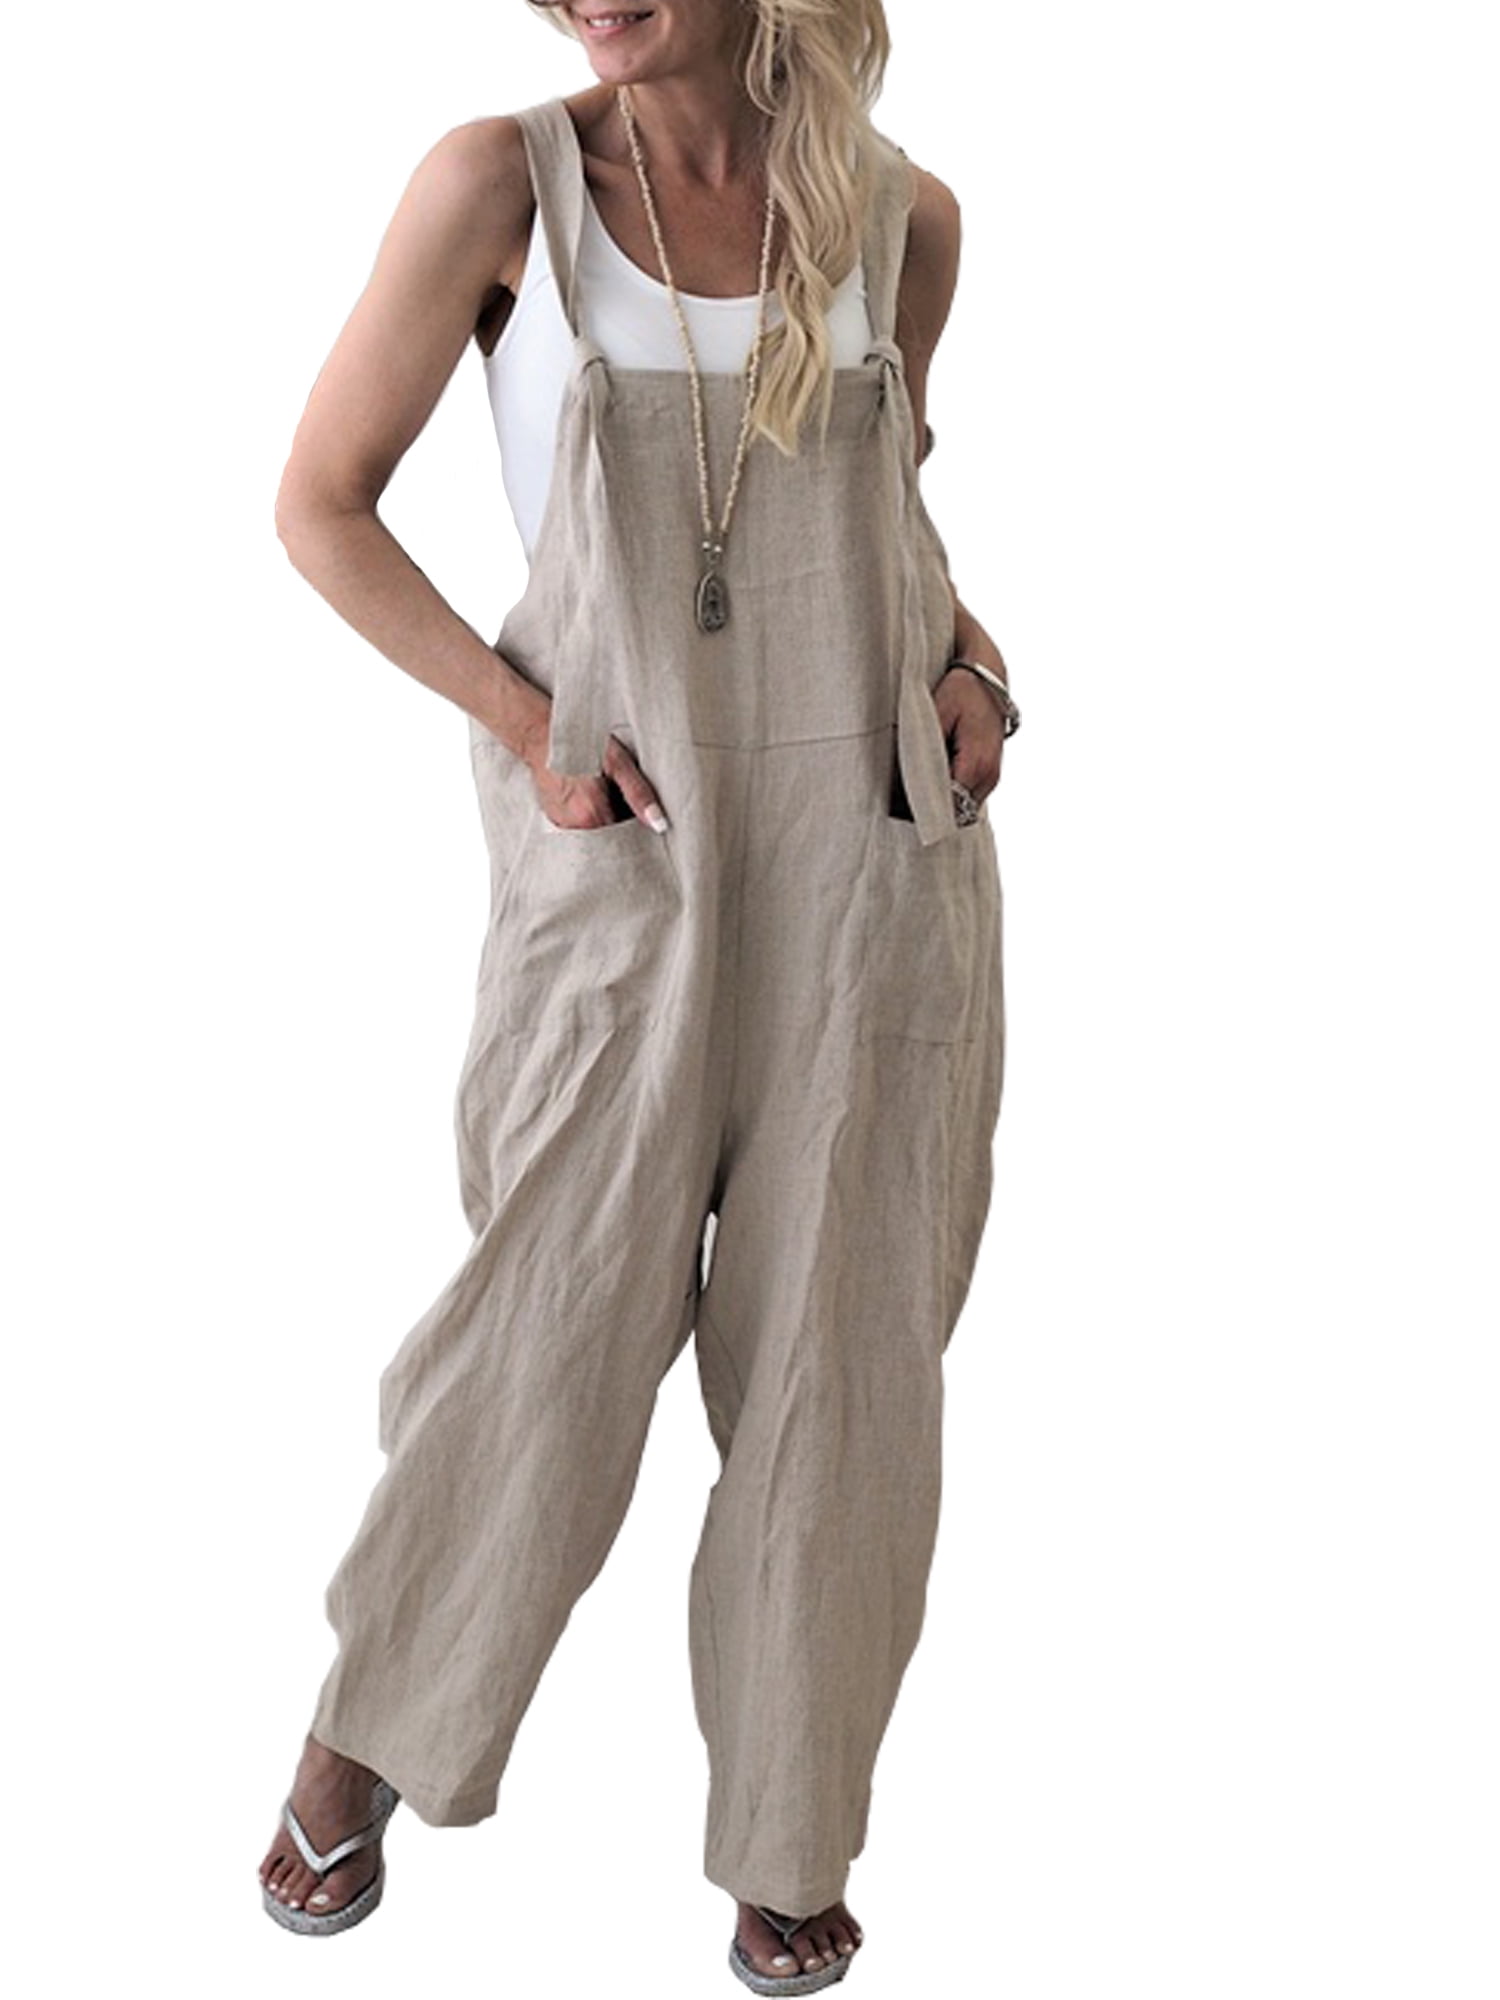 HANMAX Womens Jumpsuits Wide Leg Dungarees Rompers Plus Size Linen Overalls Baggy Overalls with Pockets 